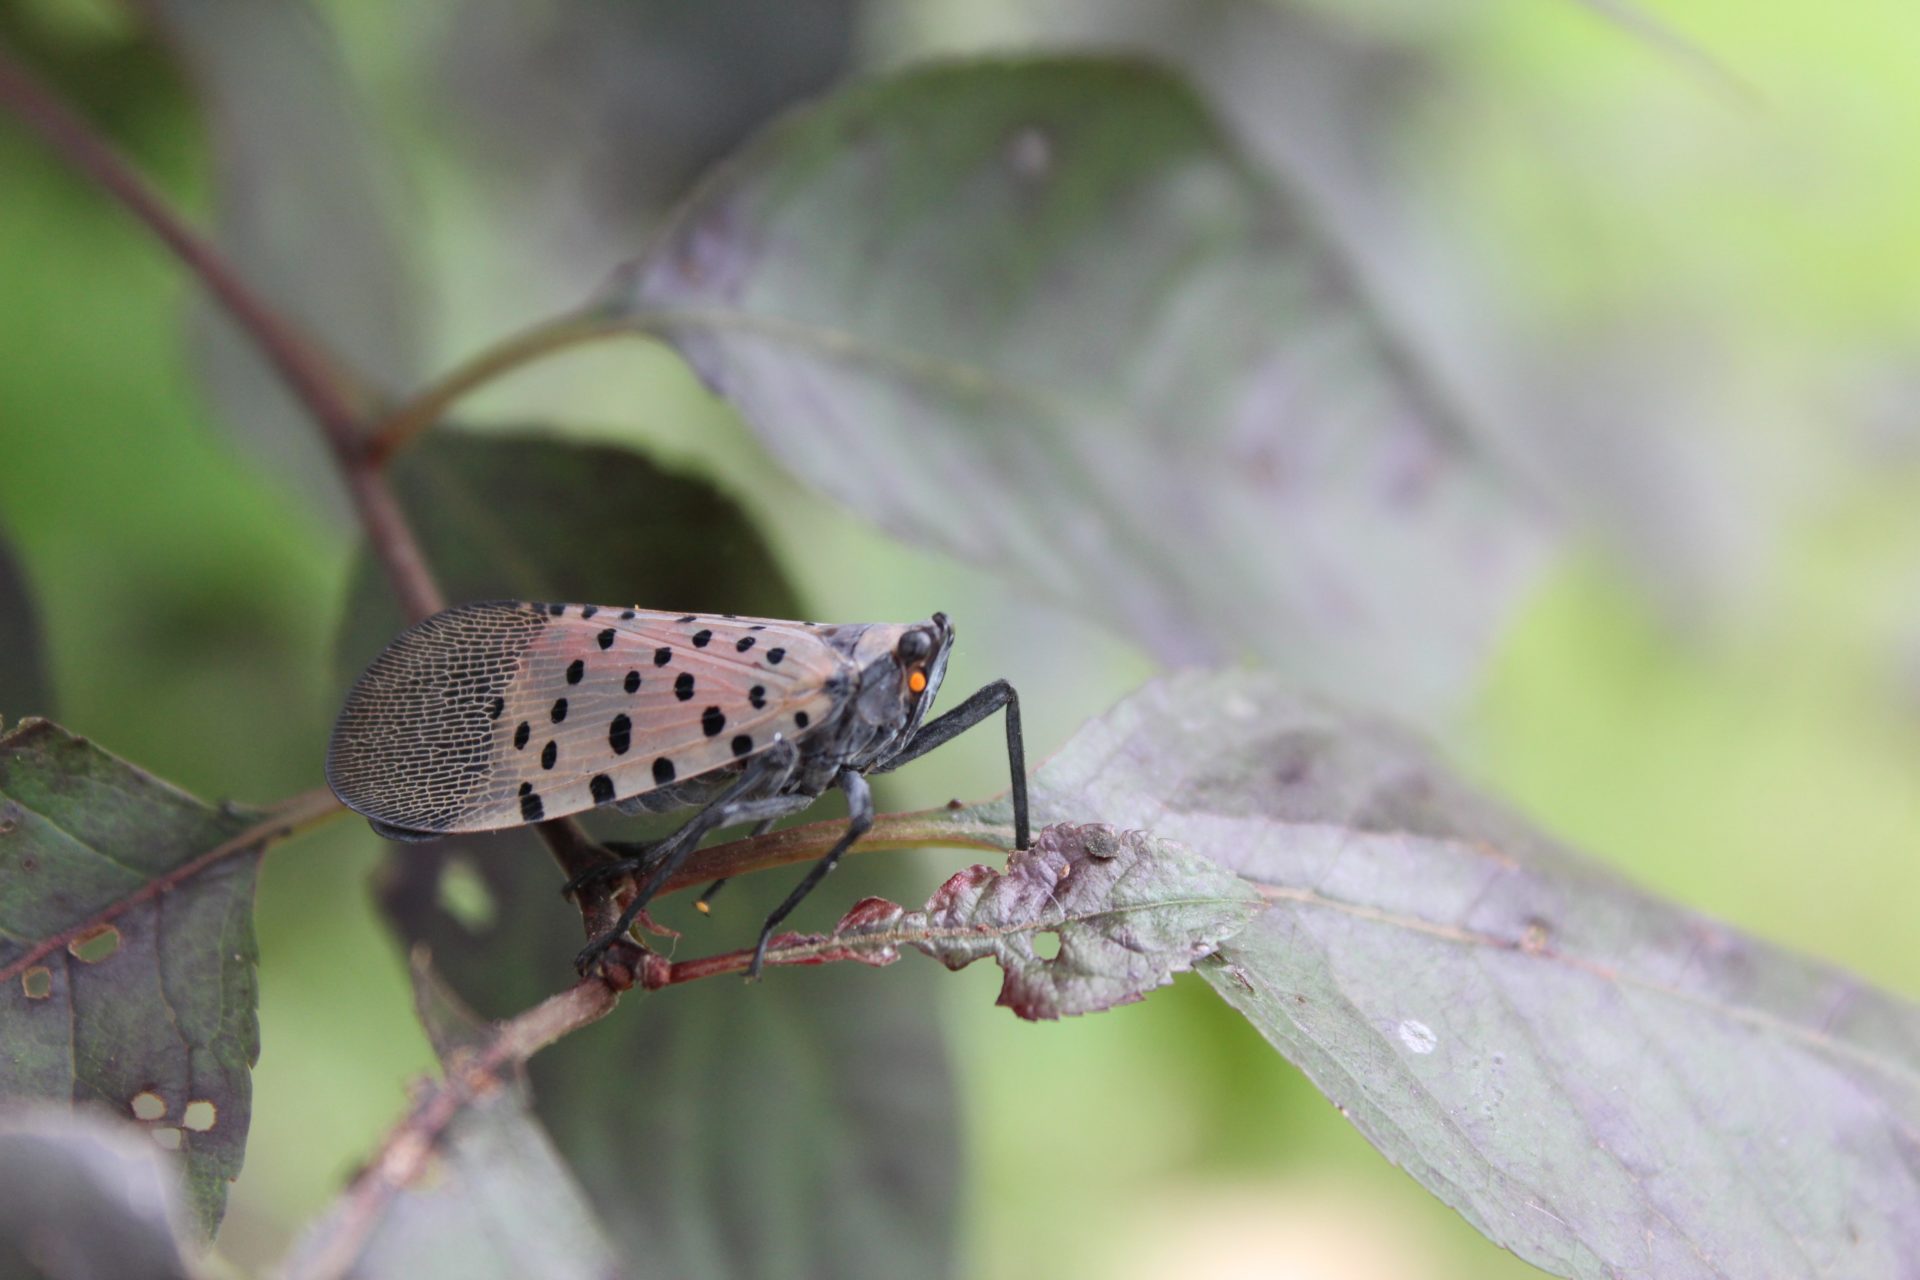 spotted lanternfly on tree branch